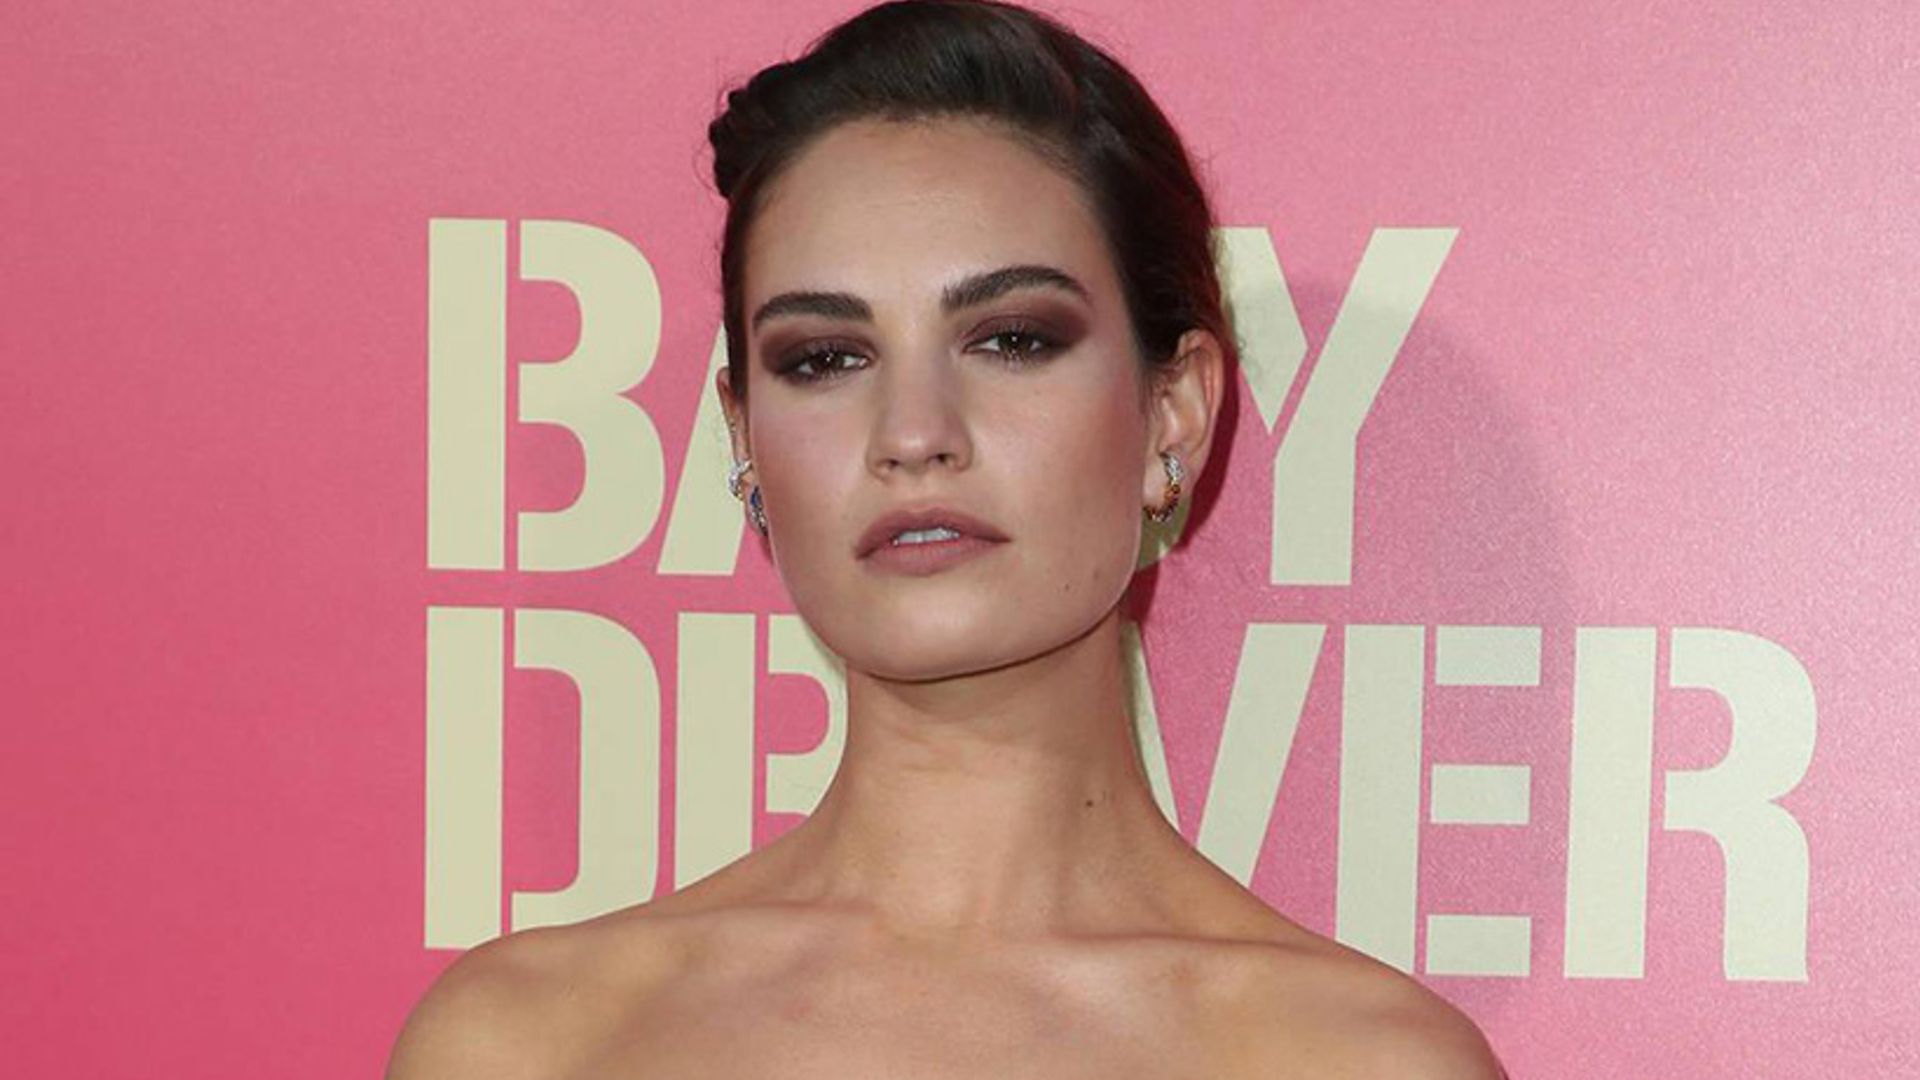 Lily James launches new Burberry fragrance campaign with seductive ads ...